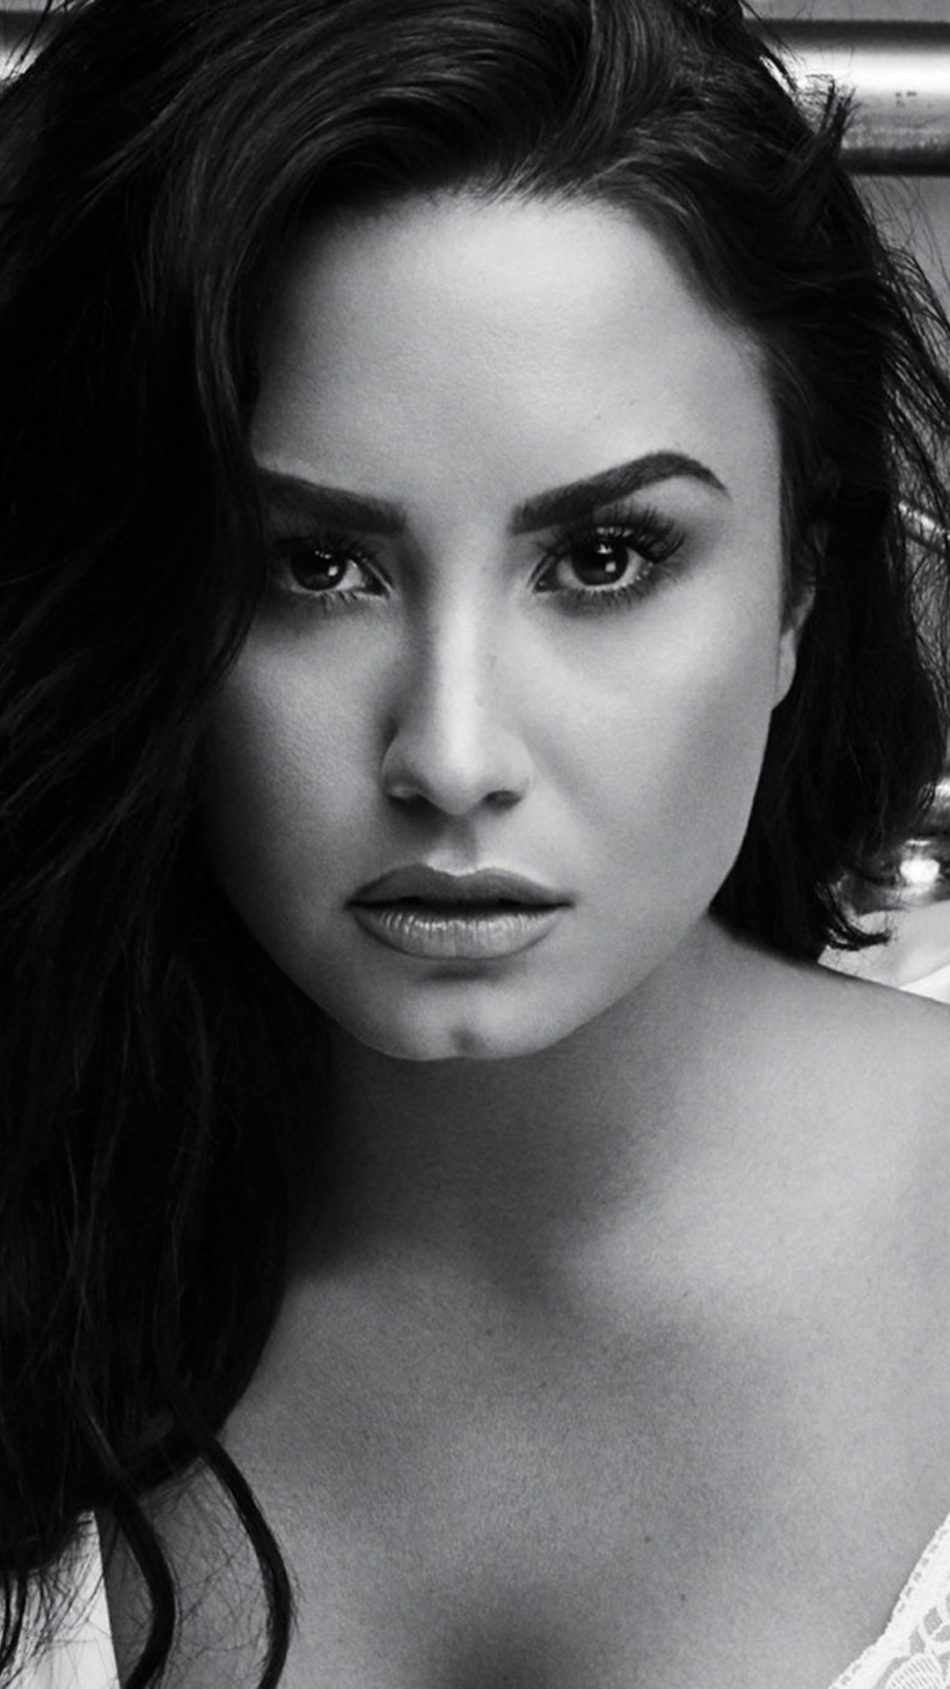 Demi Lovato Iphone Wallpapers